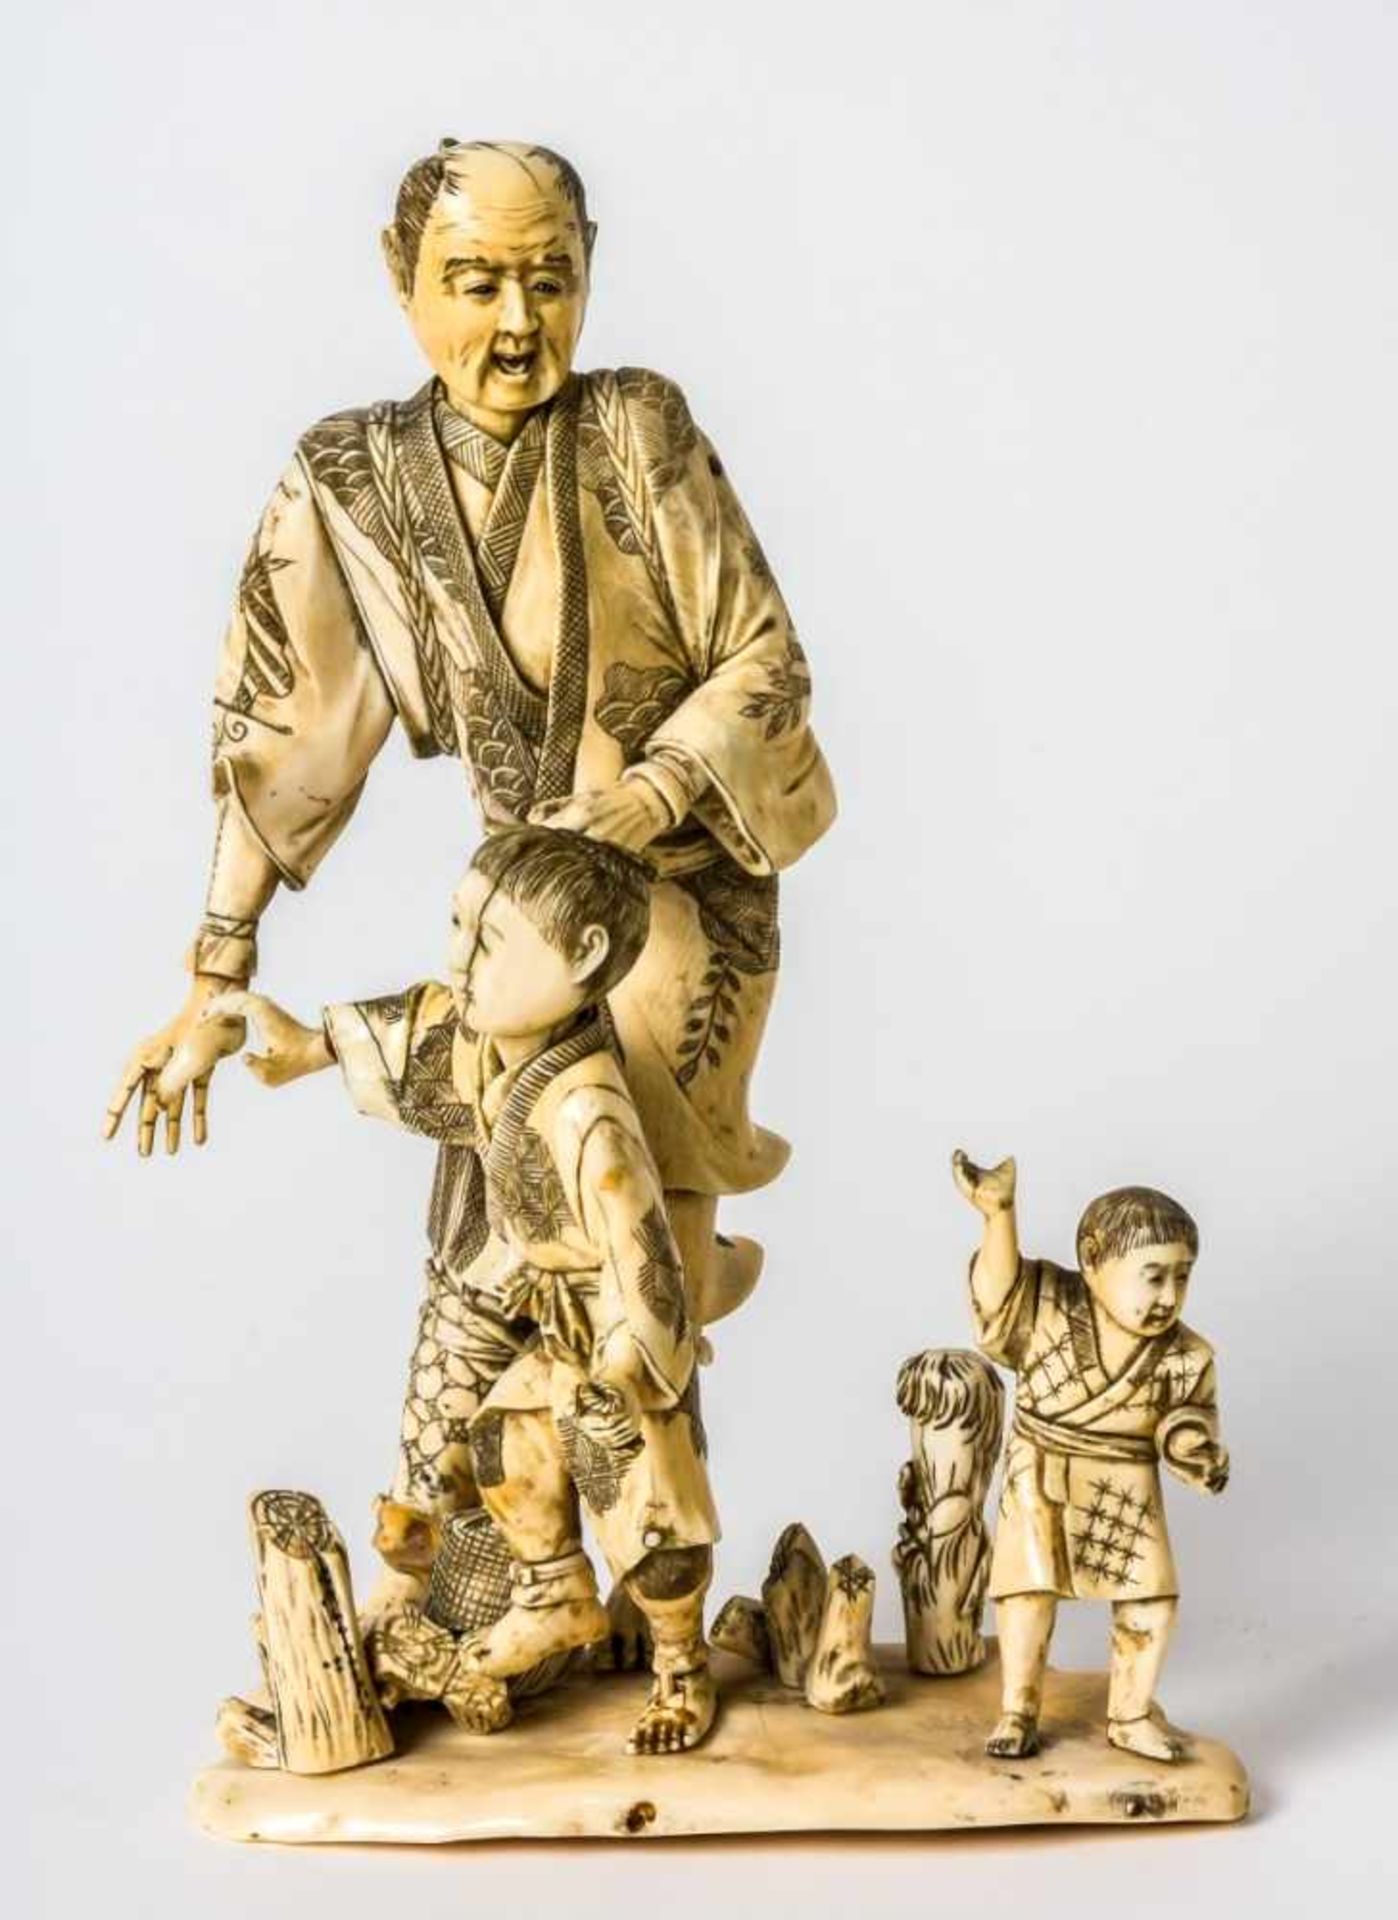 Farmer with 2 children, Japan, ivory carving, signed, probably around 1900, height: ca 26cm //